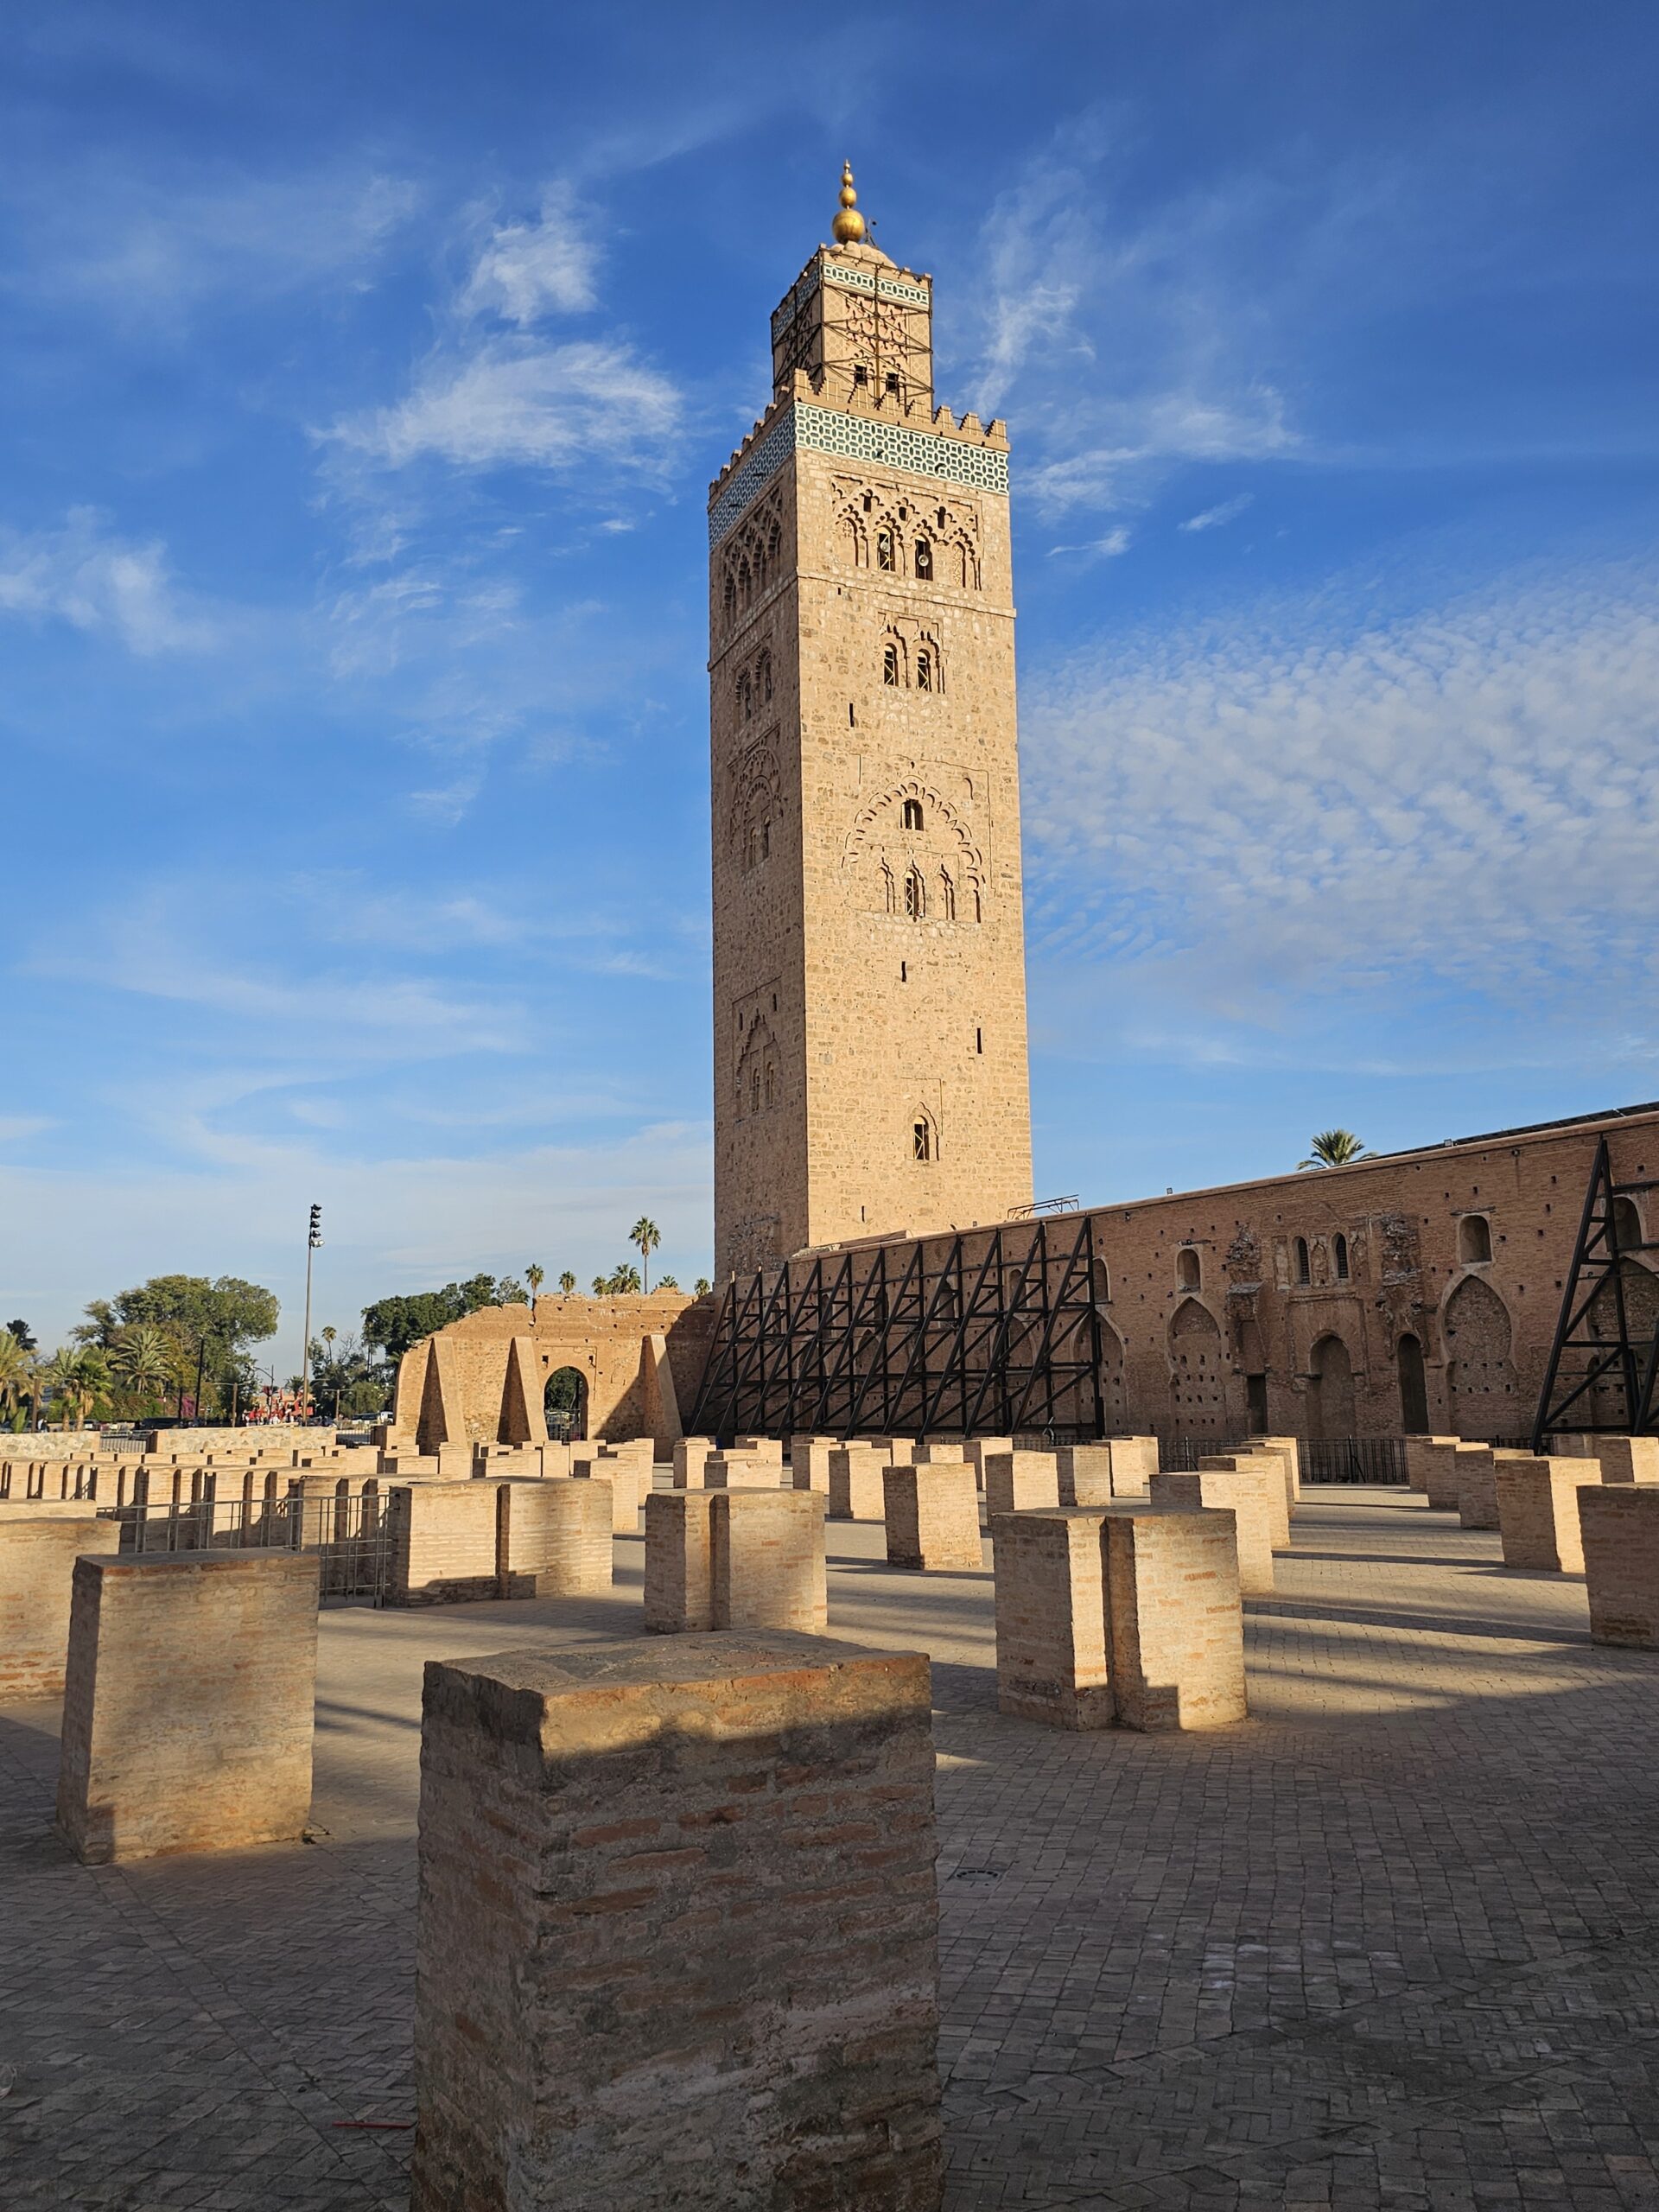 Sideview of the 12th century Koutoubia Mosque and its front yard with pillars, Marrakesh. Image by 360onhistory.com